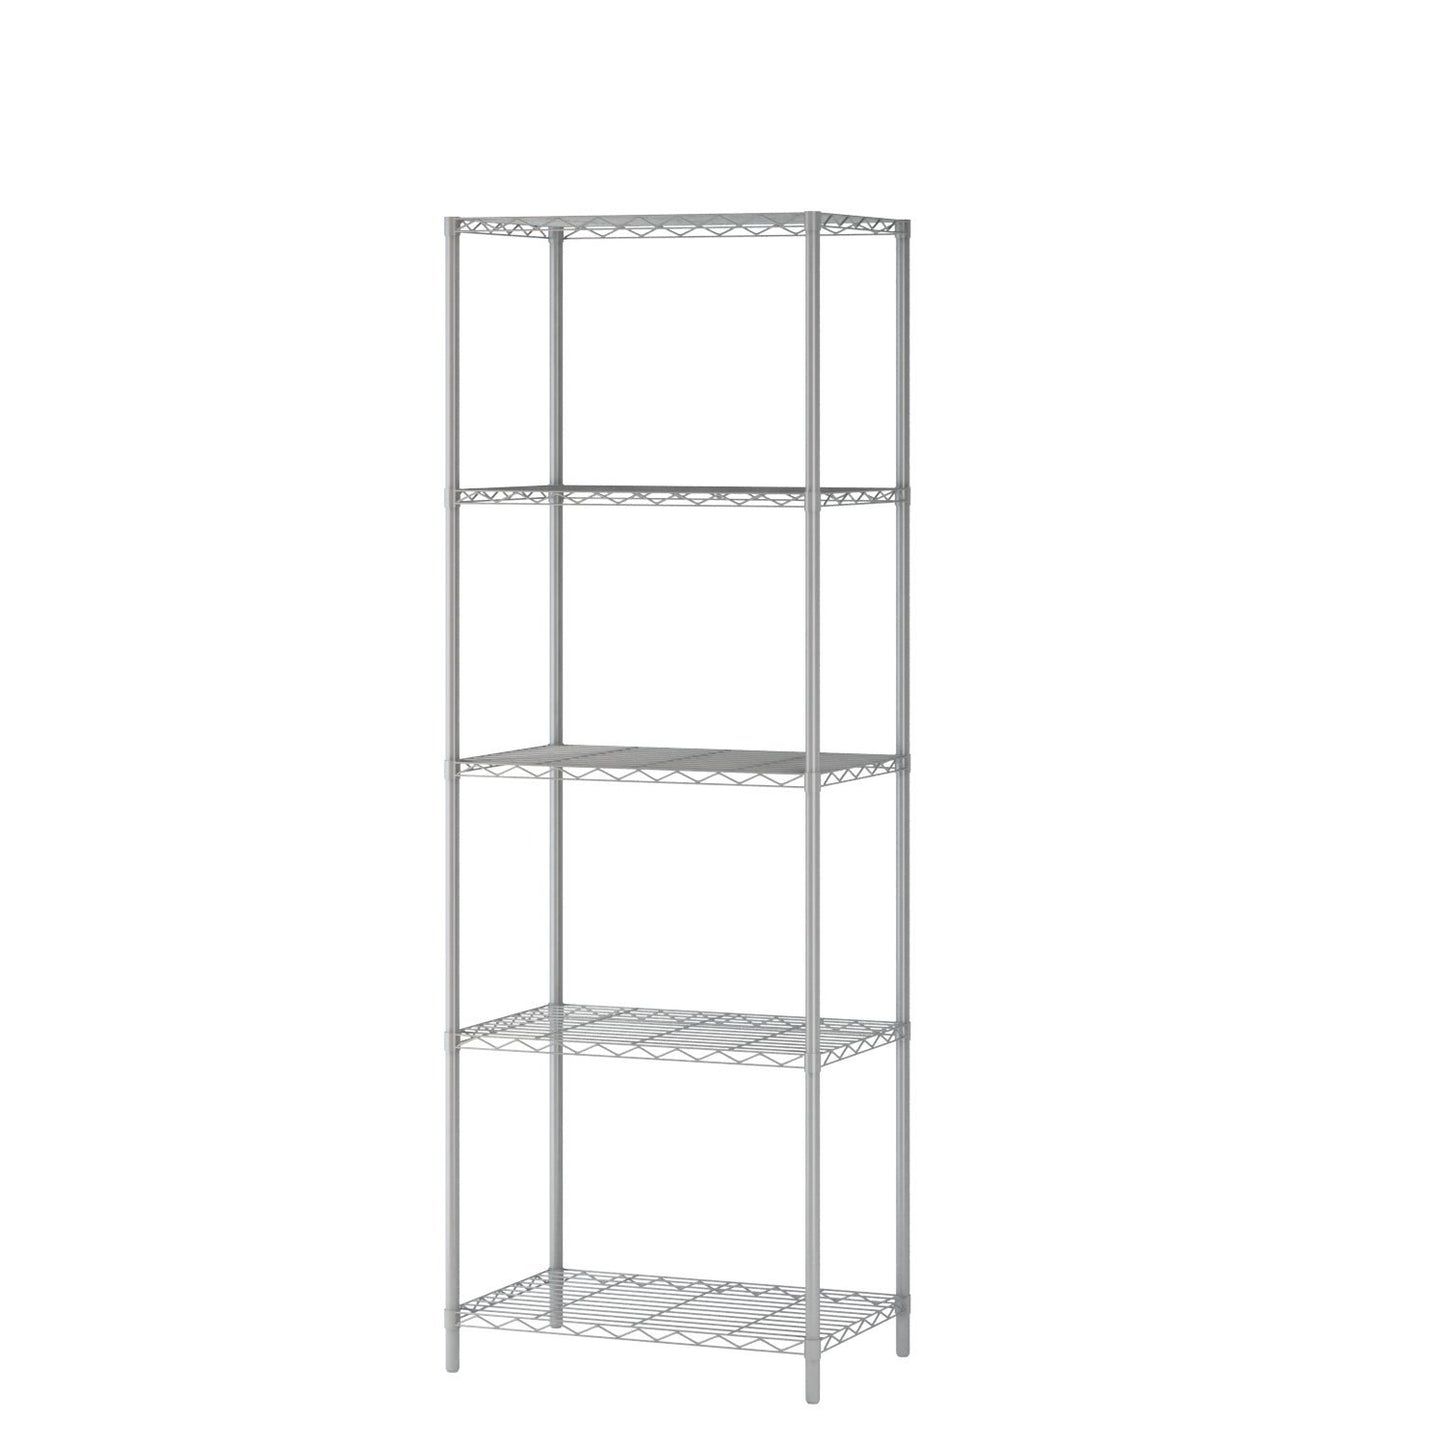 Homebi 5-Tier Wire Shelving 5 Shelves Unit Metal Storage Rack Durable Organizer Perfect for Pantry Closet Kitchen Laundry Organization in Grey,21”Wx14”Dx61”H